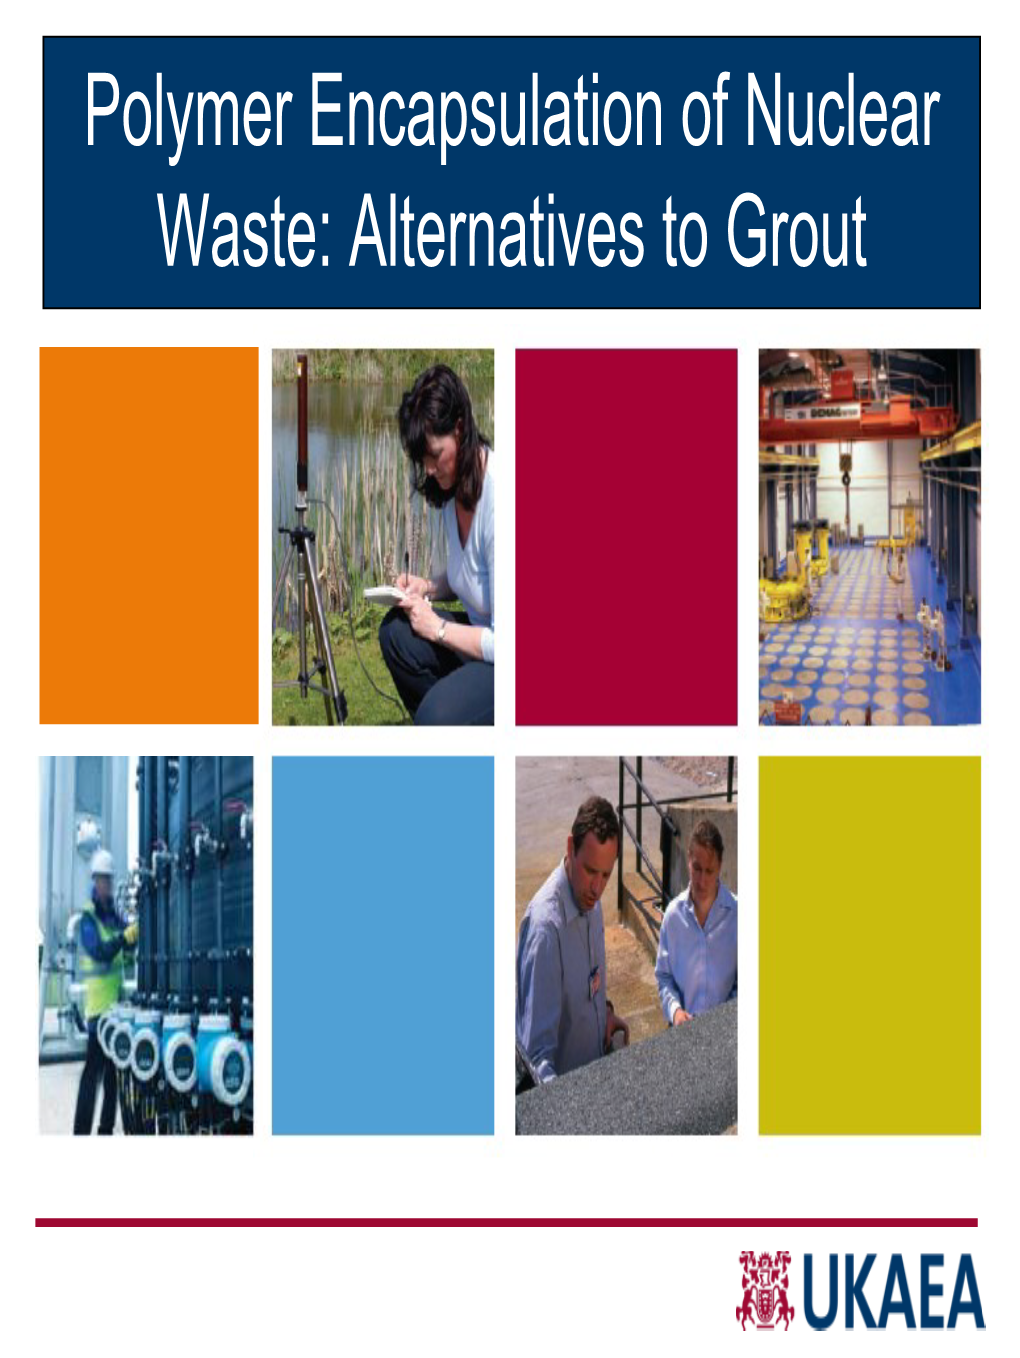 Polymer Encapsulation of Nuclear Waste: Alternatives to Grout Introduction